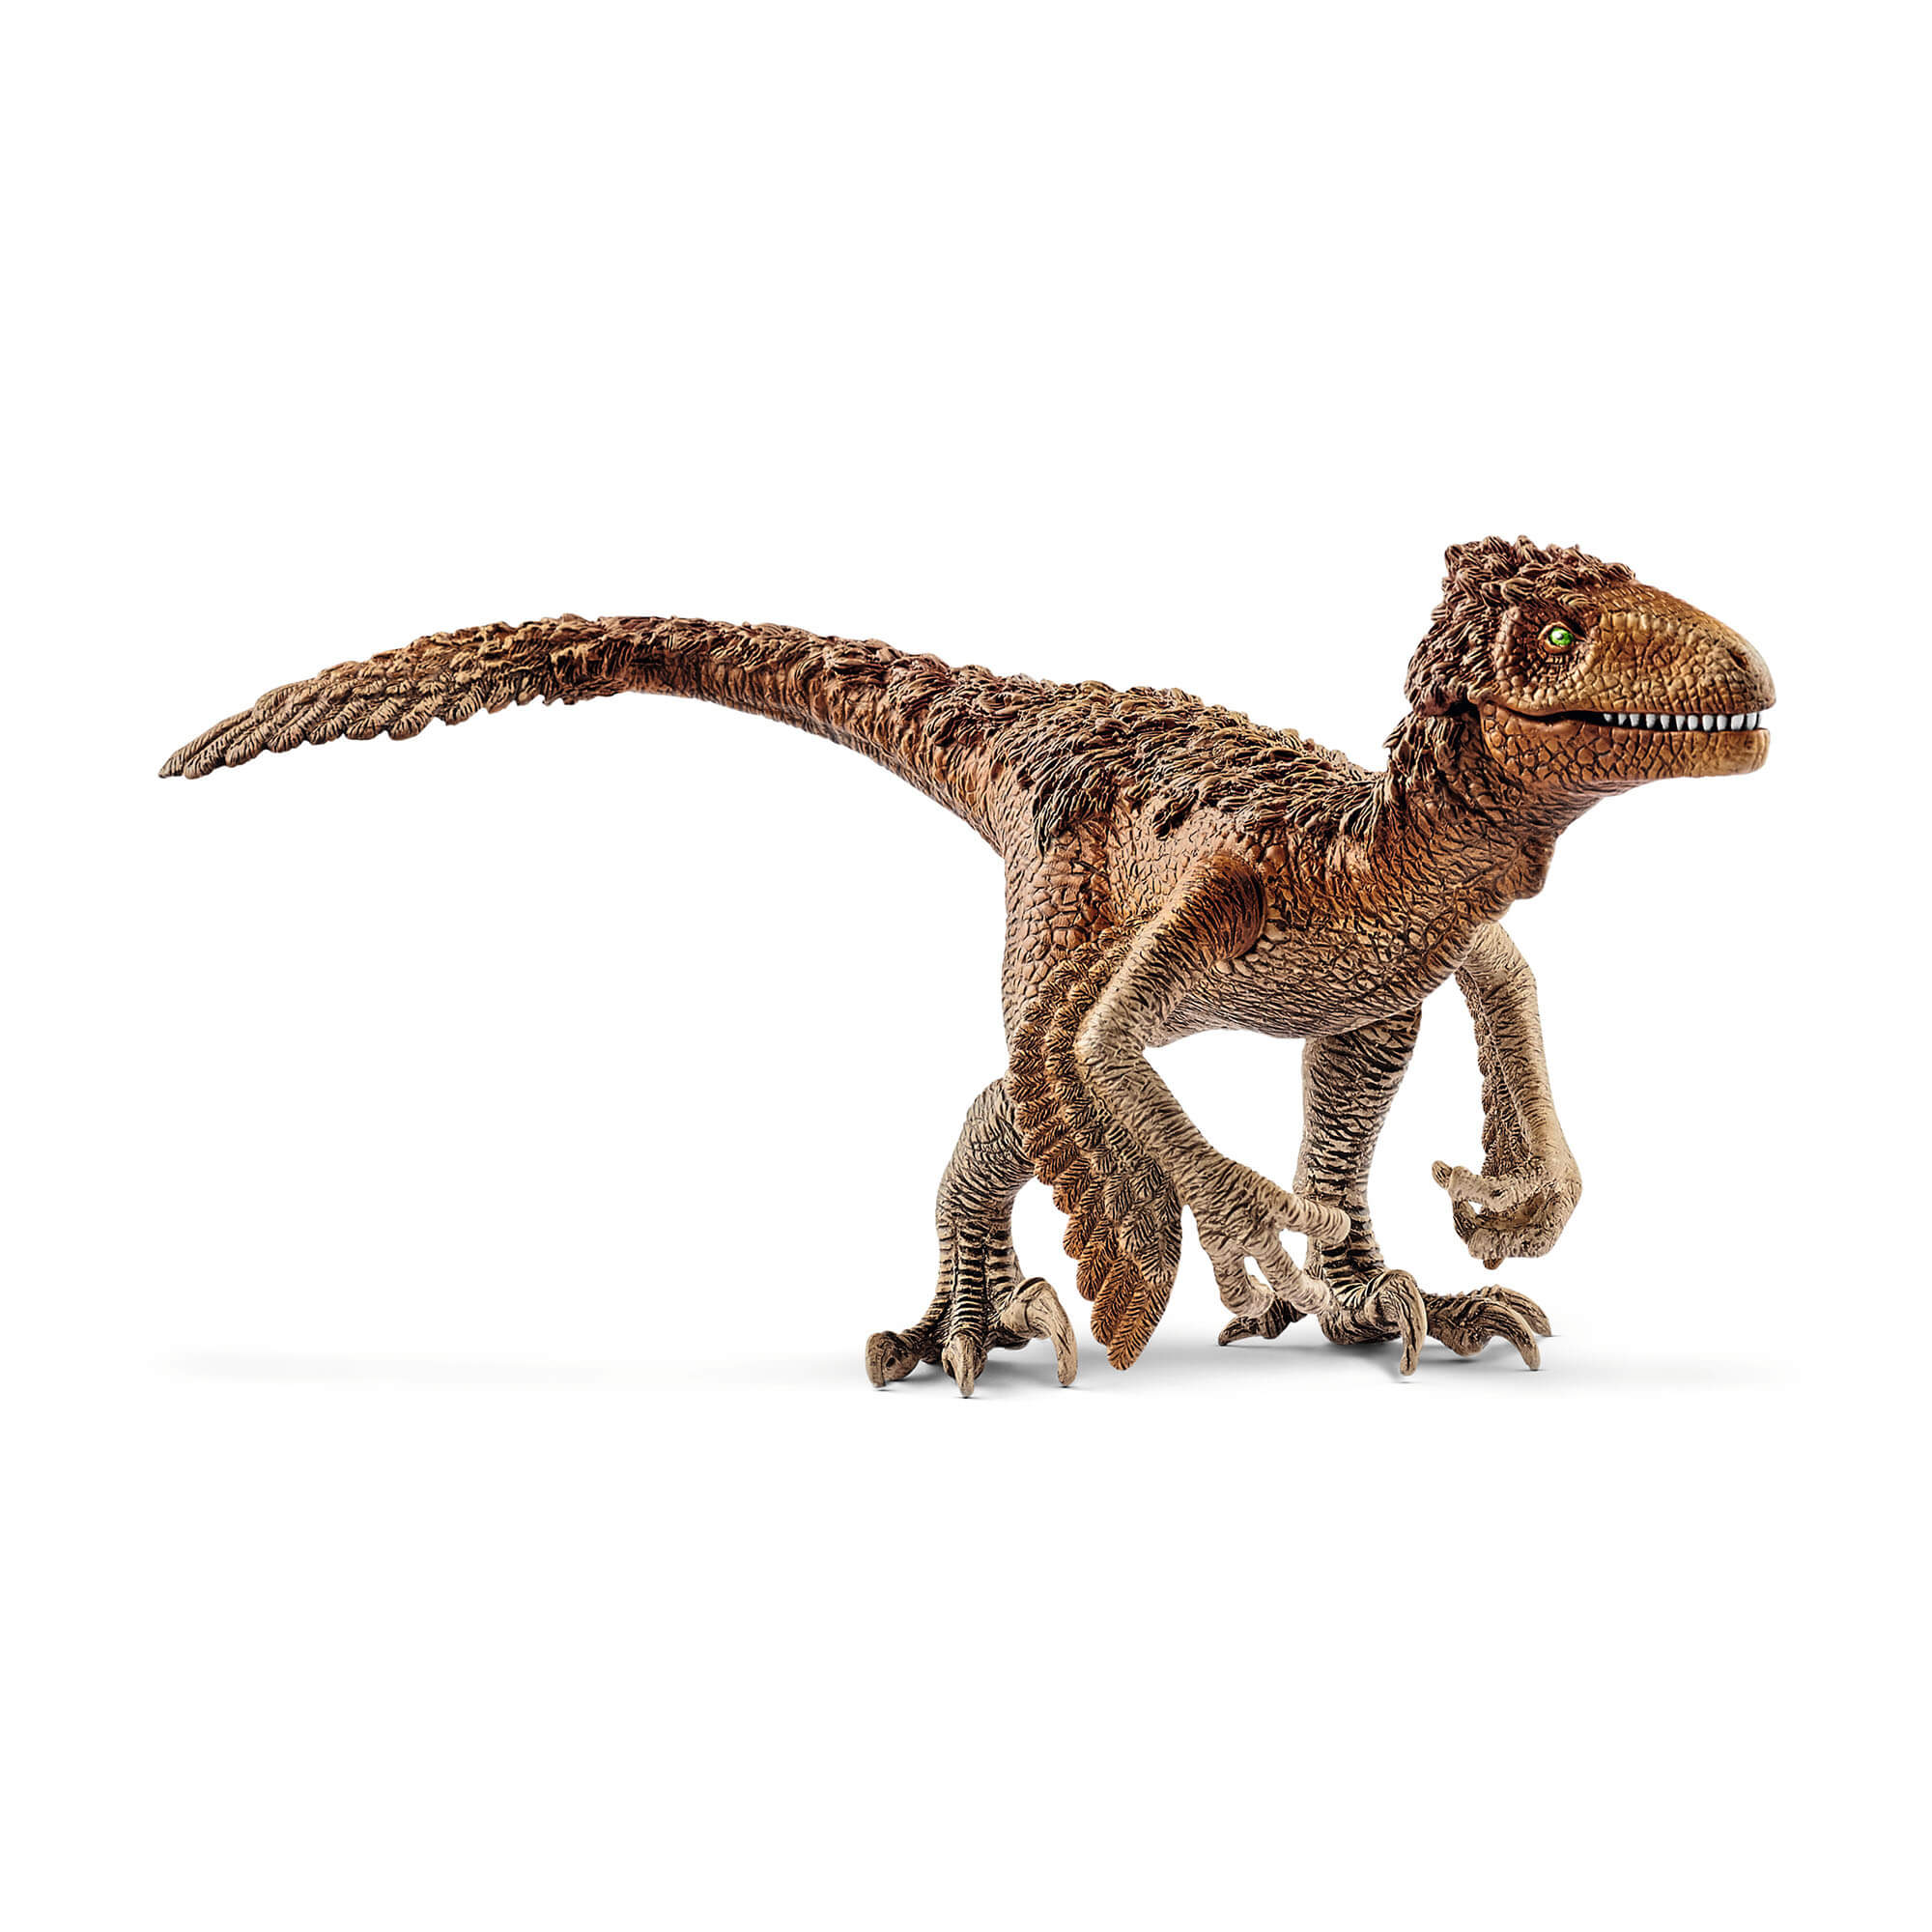 Schleich Dinosaurs Feathered Raptors Play Set